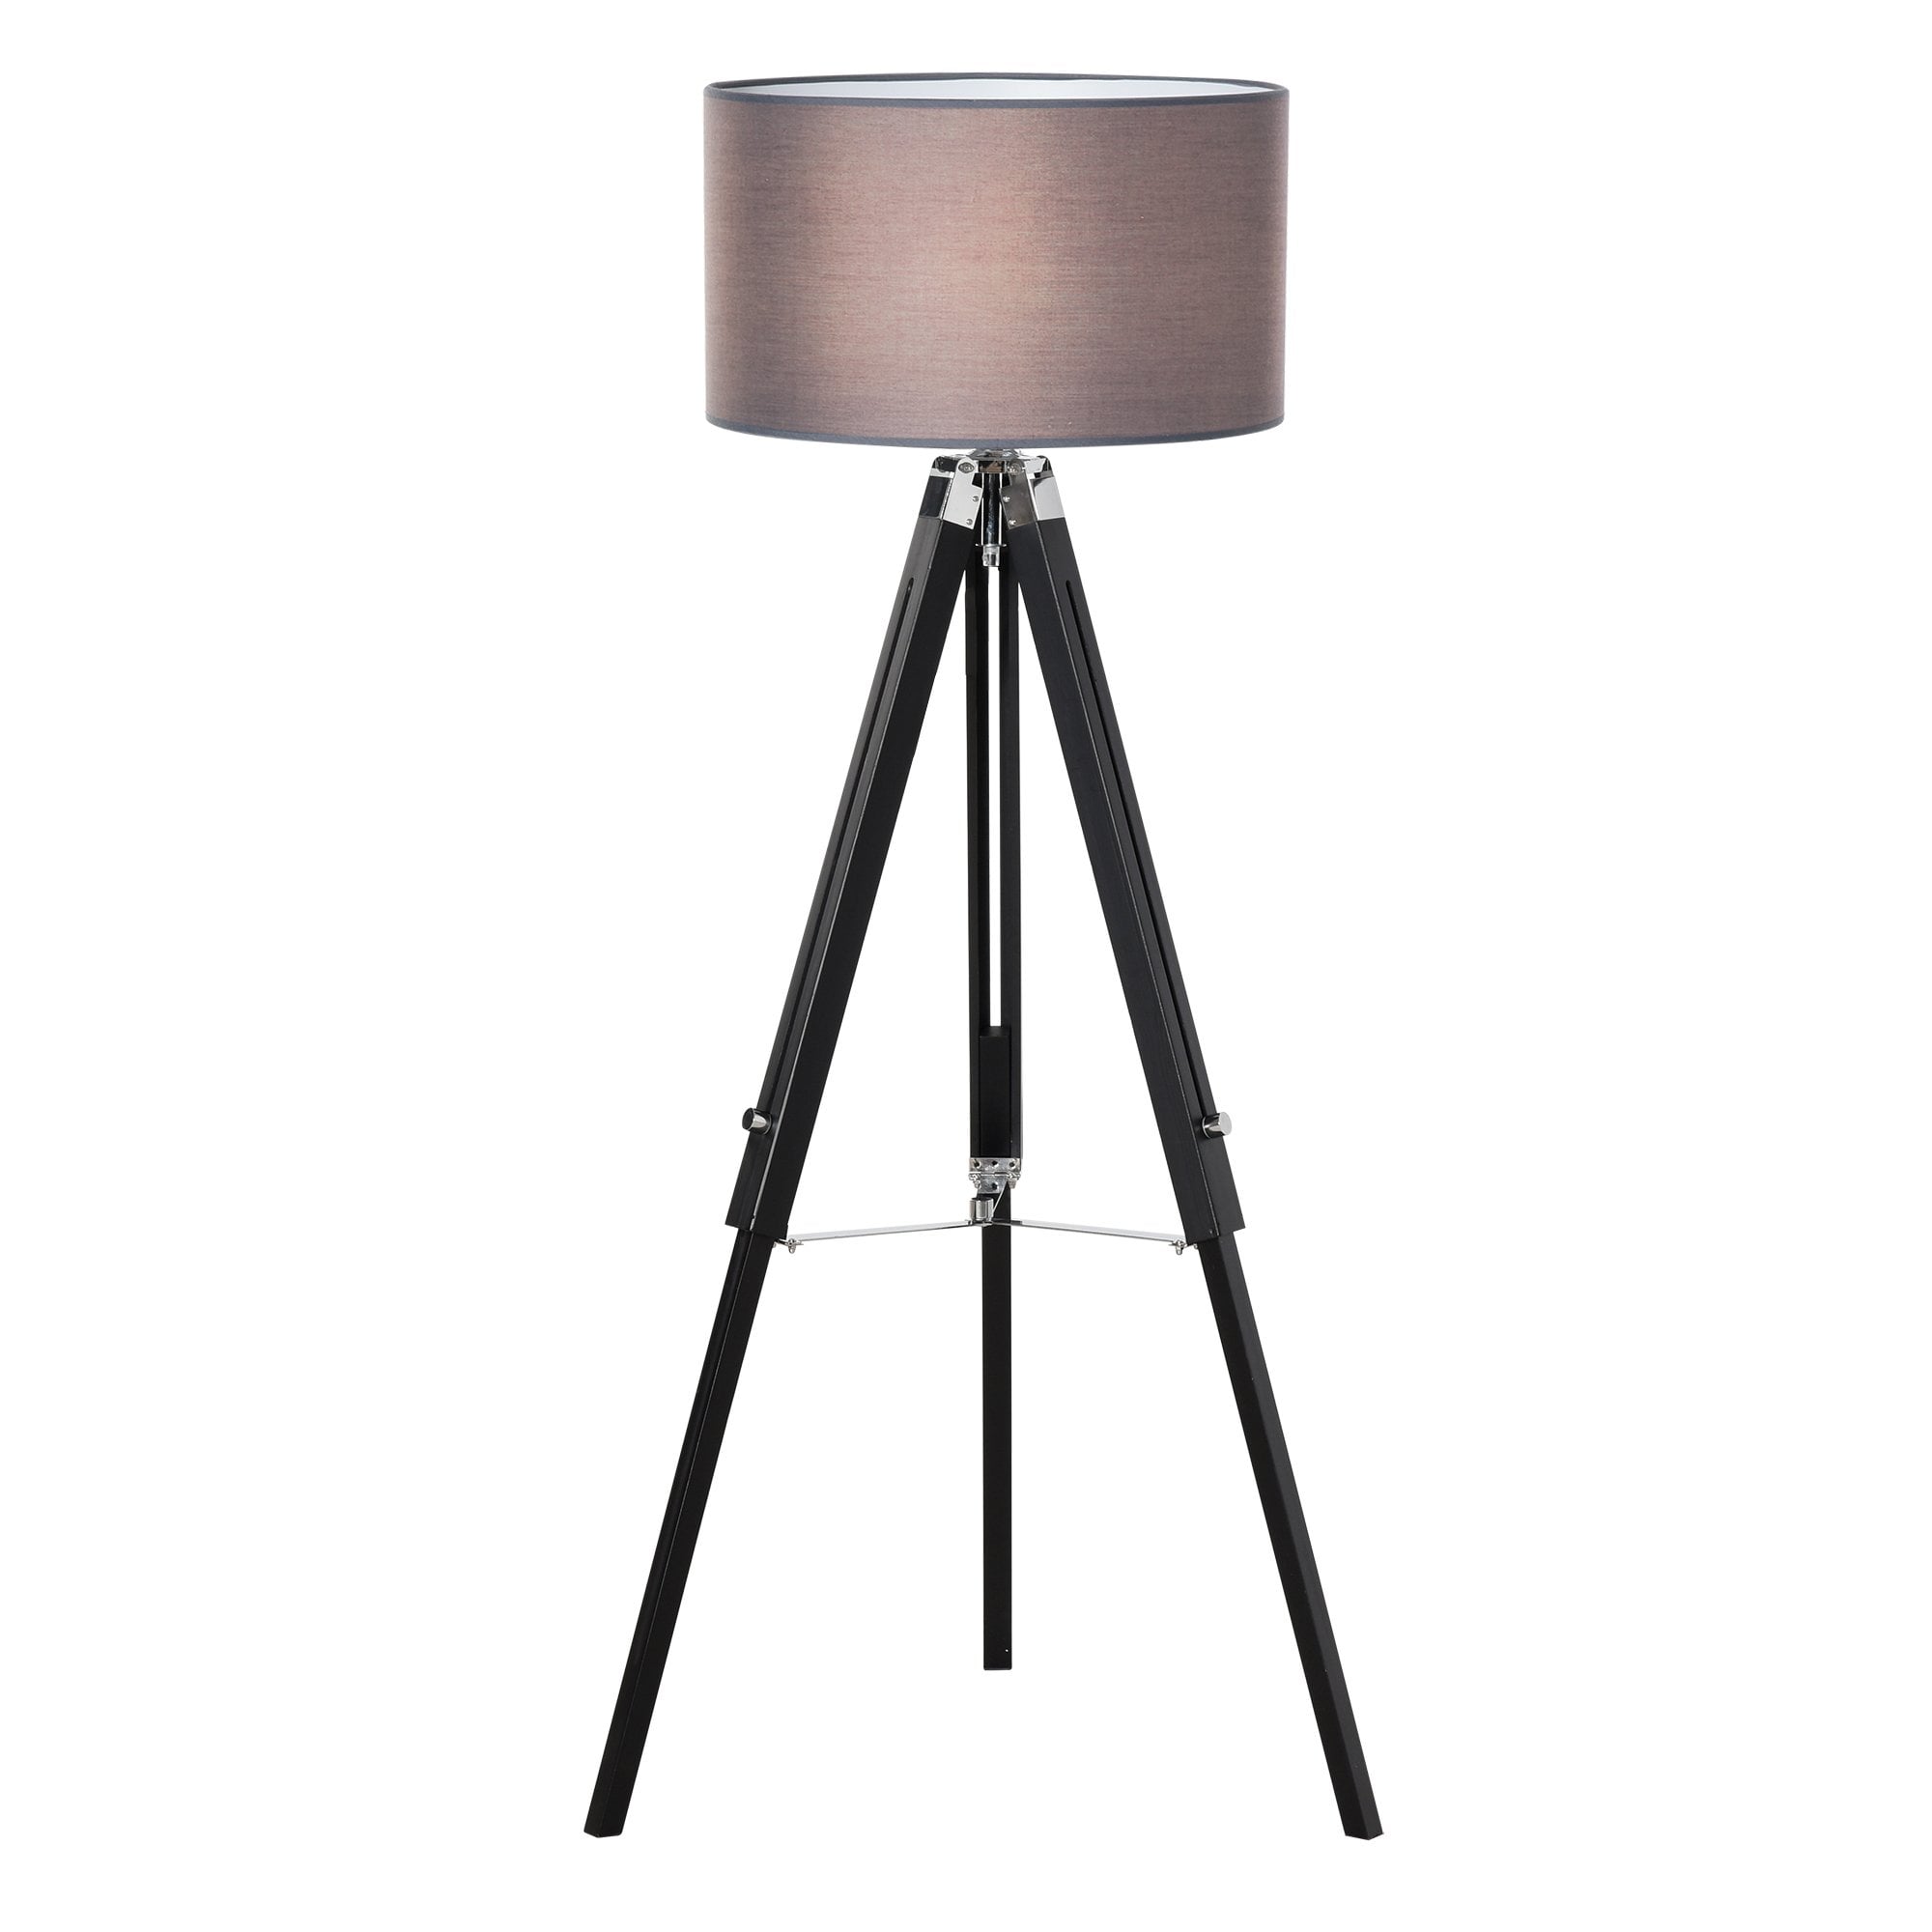 HOMCOM Modern Tripod Stand Floor Land Lamp with Wood Leg Adjustable Height Fabric Lampshade for Living Room - Bedroom - Office - Grey and Black Base